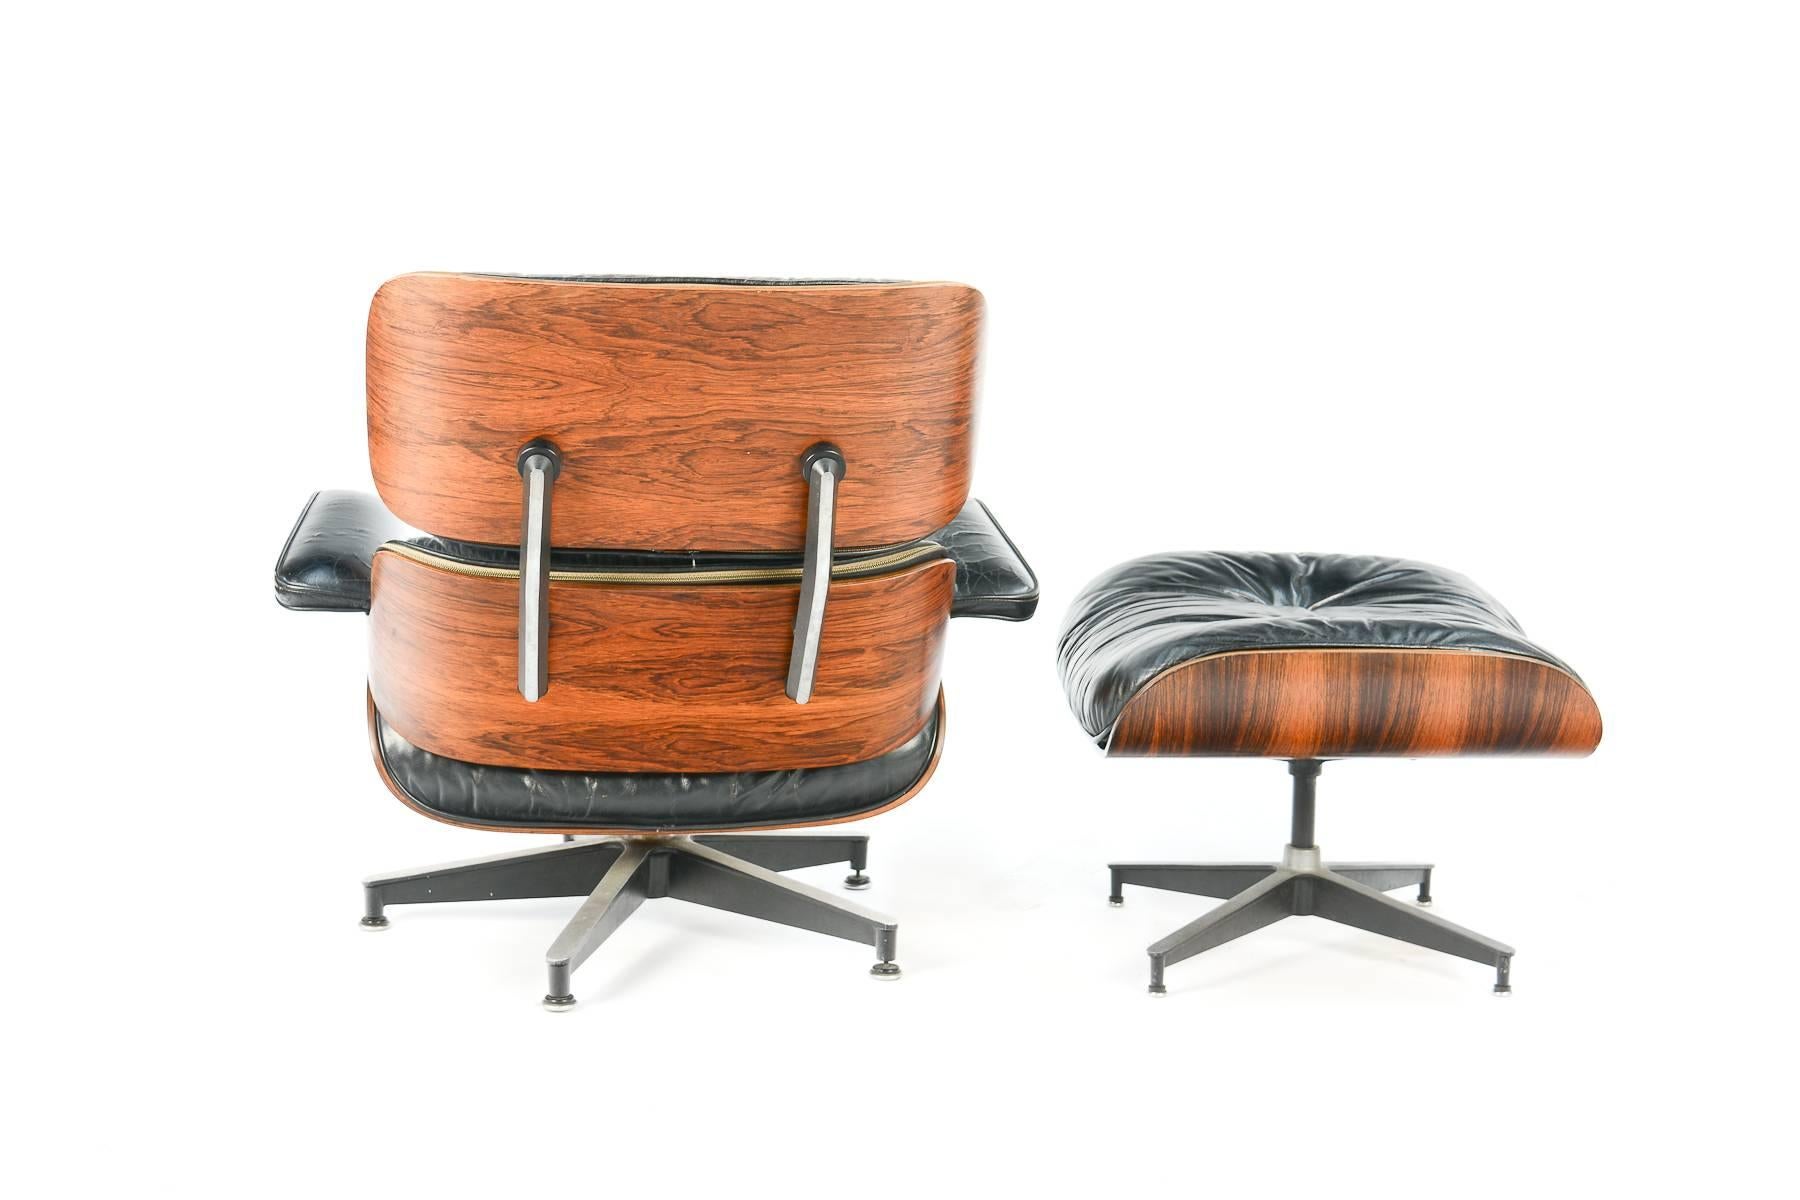 A beautiful edition of the iconic 670 lounge chair and 671 ottoman by Charles and Ray Eames for Herman Miller in rosewood. Dated "9/70", both the chair and ottoman are wonderfully grained with distressed original leather.

The ottoman